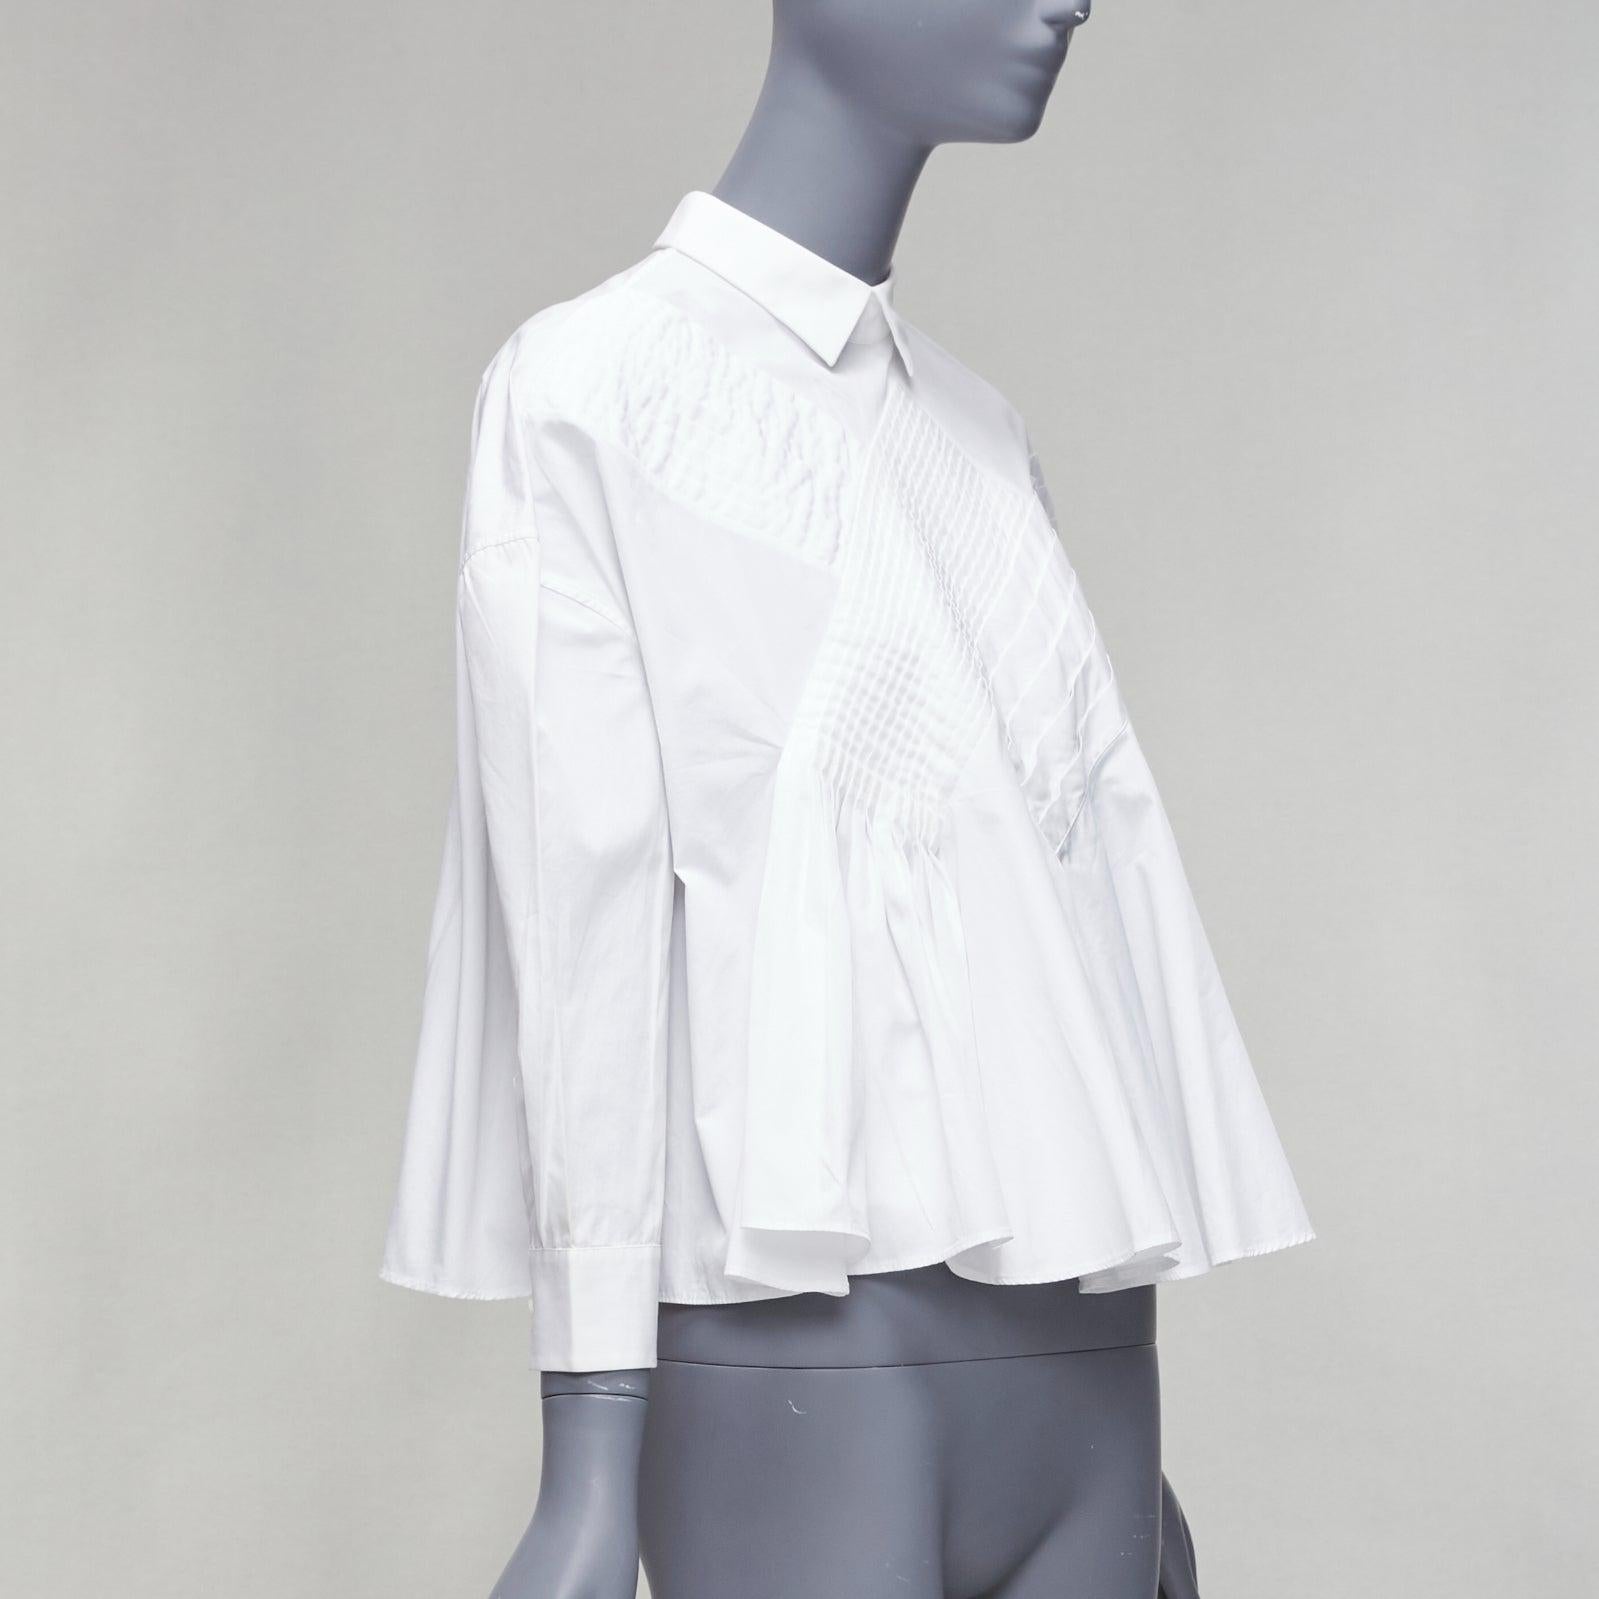 VIKTOR & ROLF white cotton criss cross pleated collared boxy flare shirt IT40 S
Reference: EALU/A00004
Brand: Viktor & Rolf
Material: Cotton
Color: White
Pattern: Solid
Closure: Zip
Extra Details: Back zip.
Made in: Italy

CONDITION:
Condition: